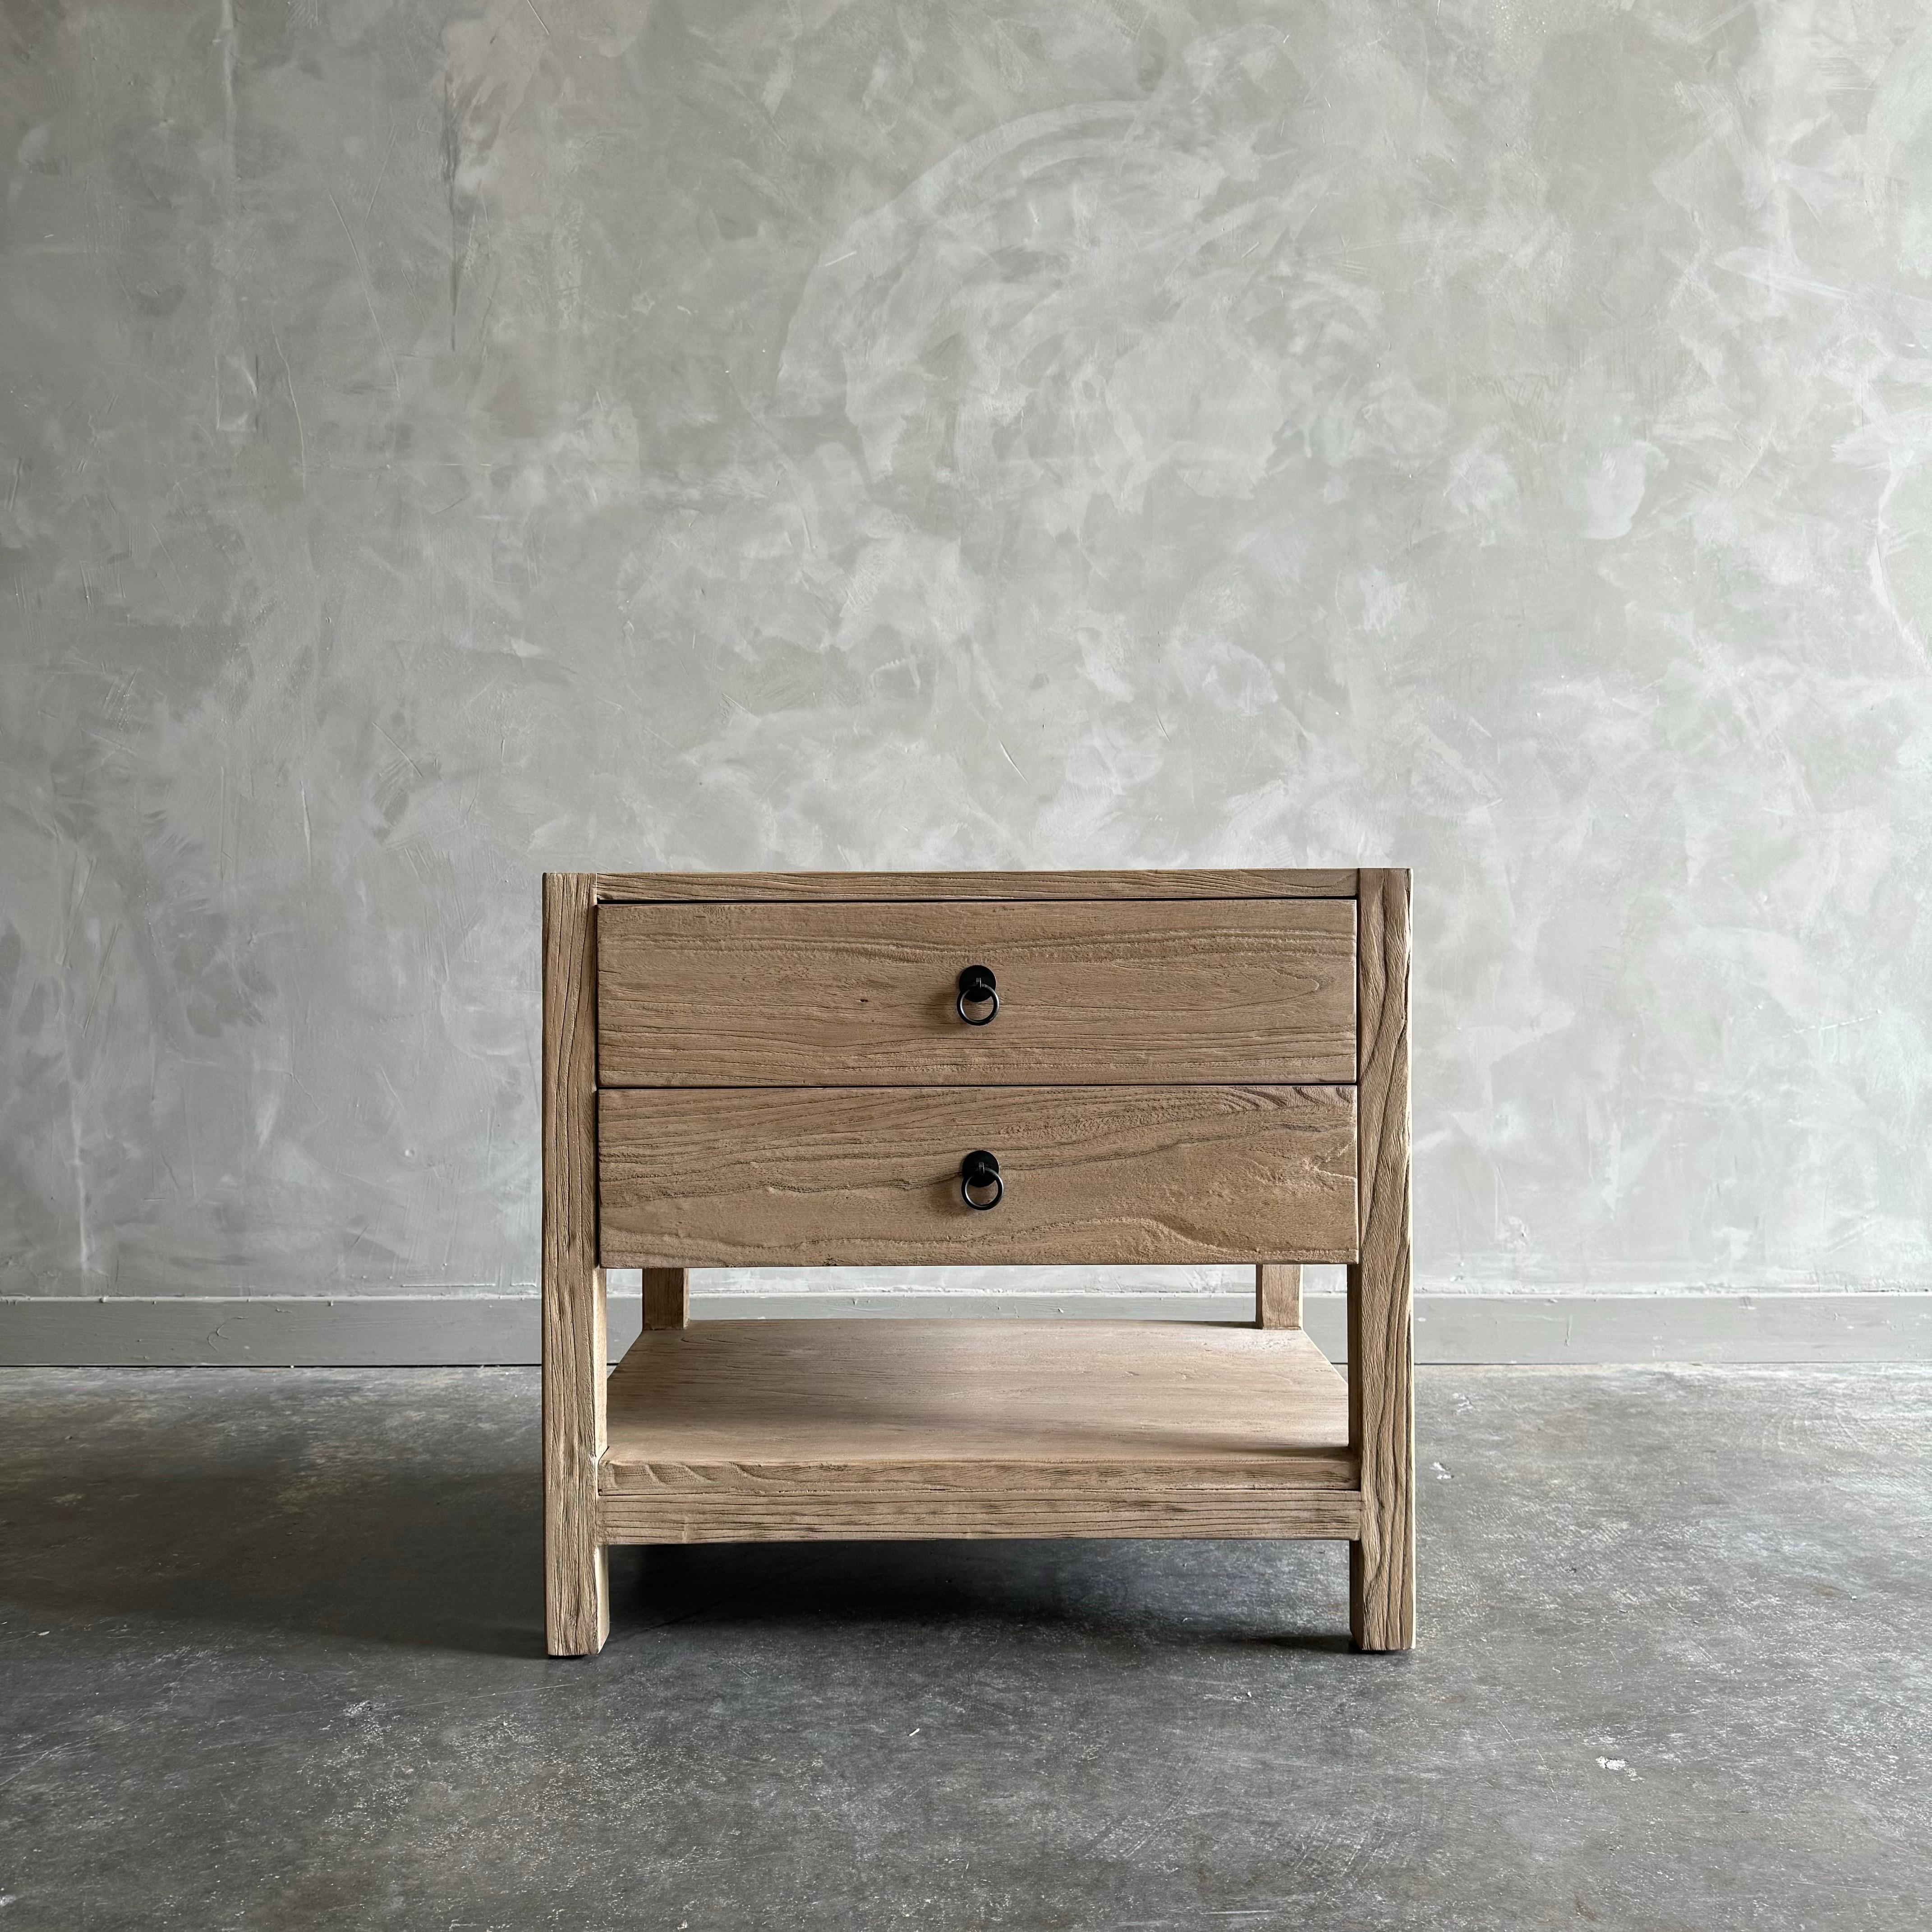 The Natalie Nightstand is a charming bedside storage solution. The two-drawers offers both convenience and function. Due to the reclaimed wood material, some variations and imperfections are considered normal and add to the unique character of each